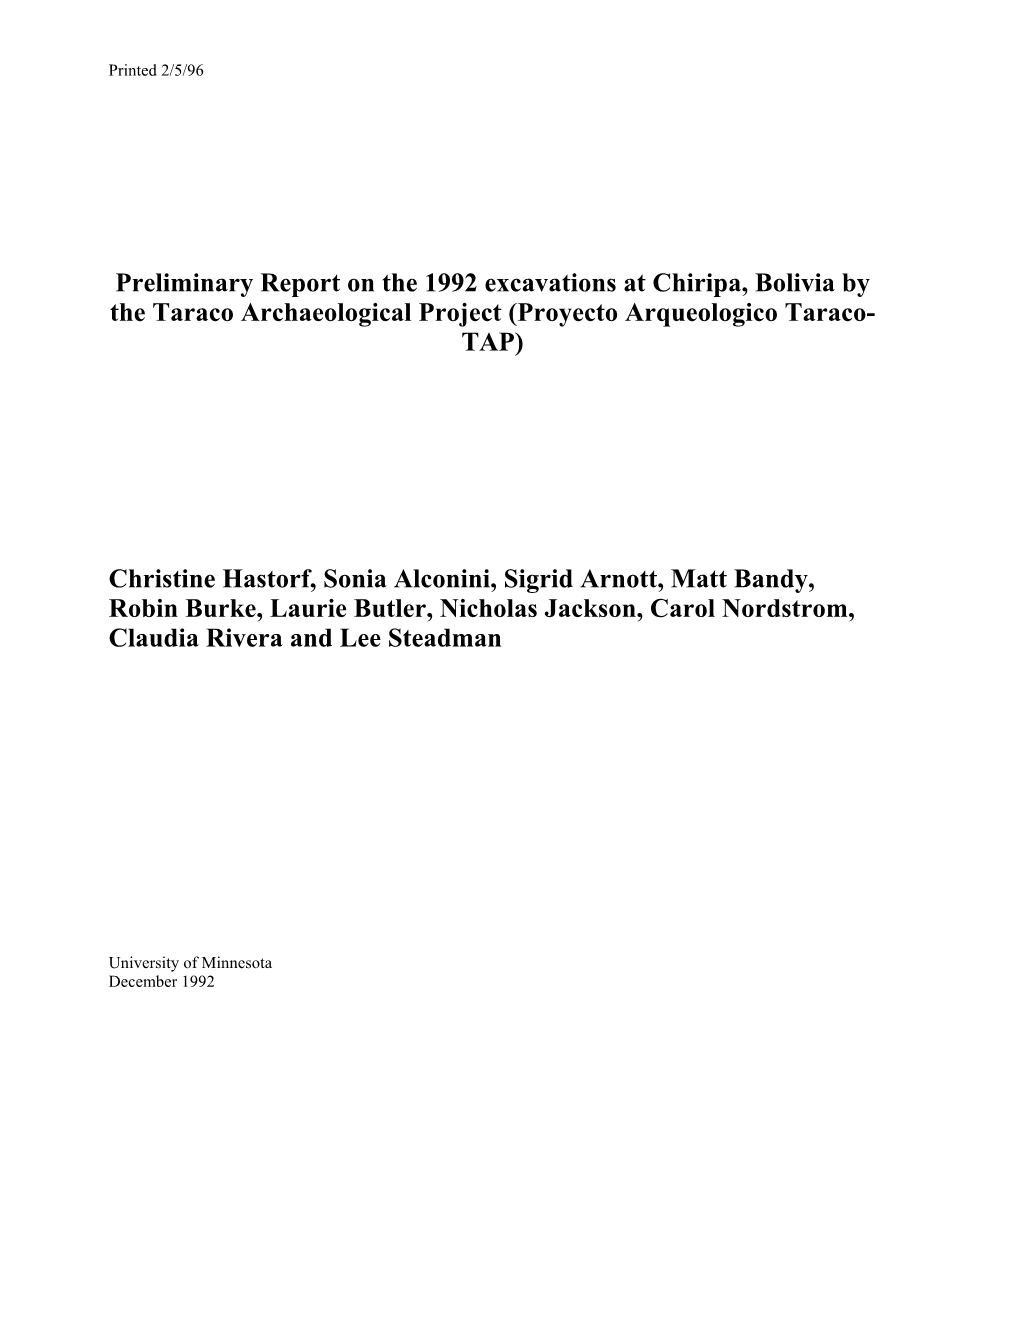 Preliminary Report on the 1992 Excavations at Chiripa, Bolivia by the Taraco Archaeological Project (Proyecto Arqueologico Taraco- TAP)